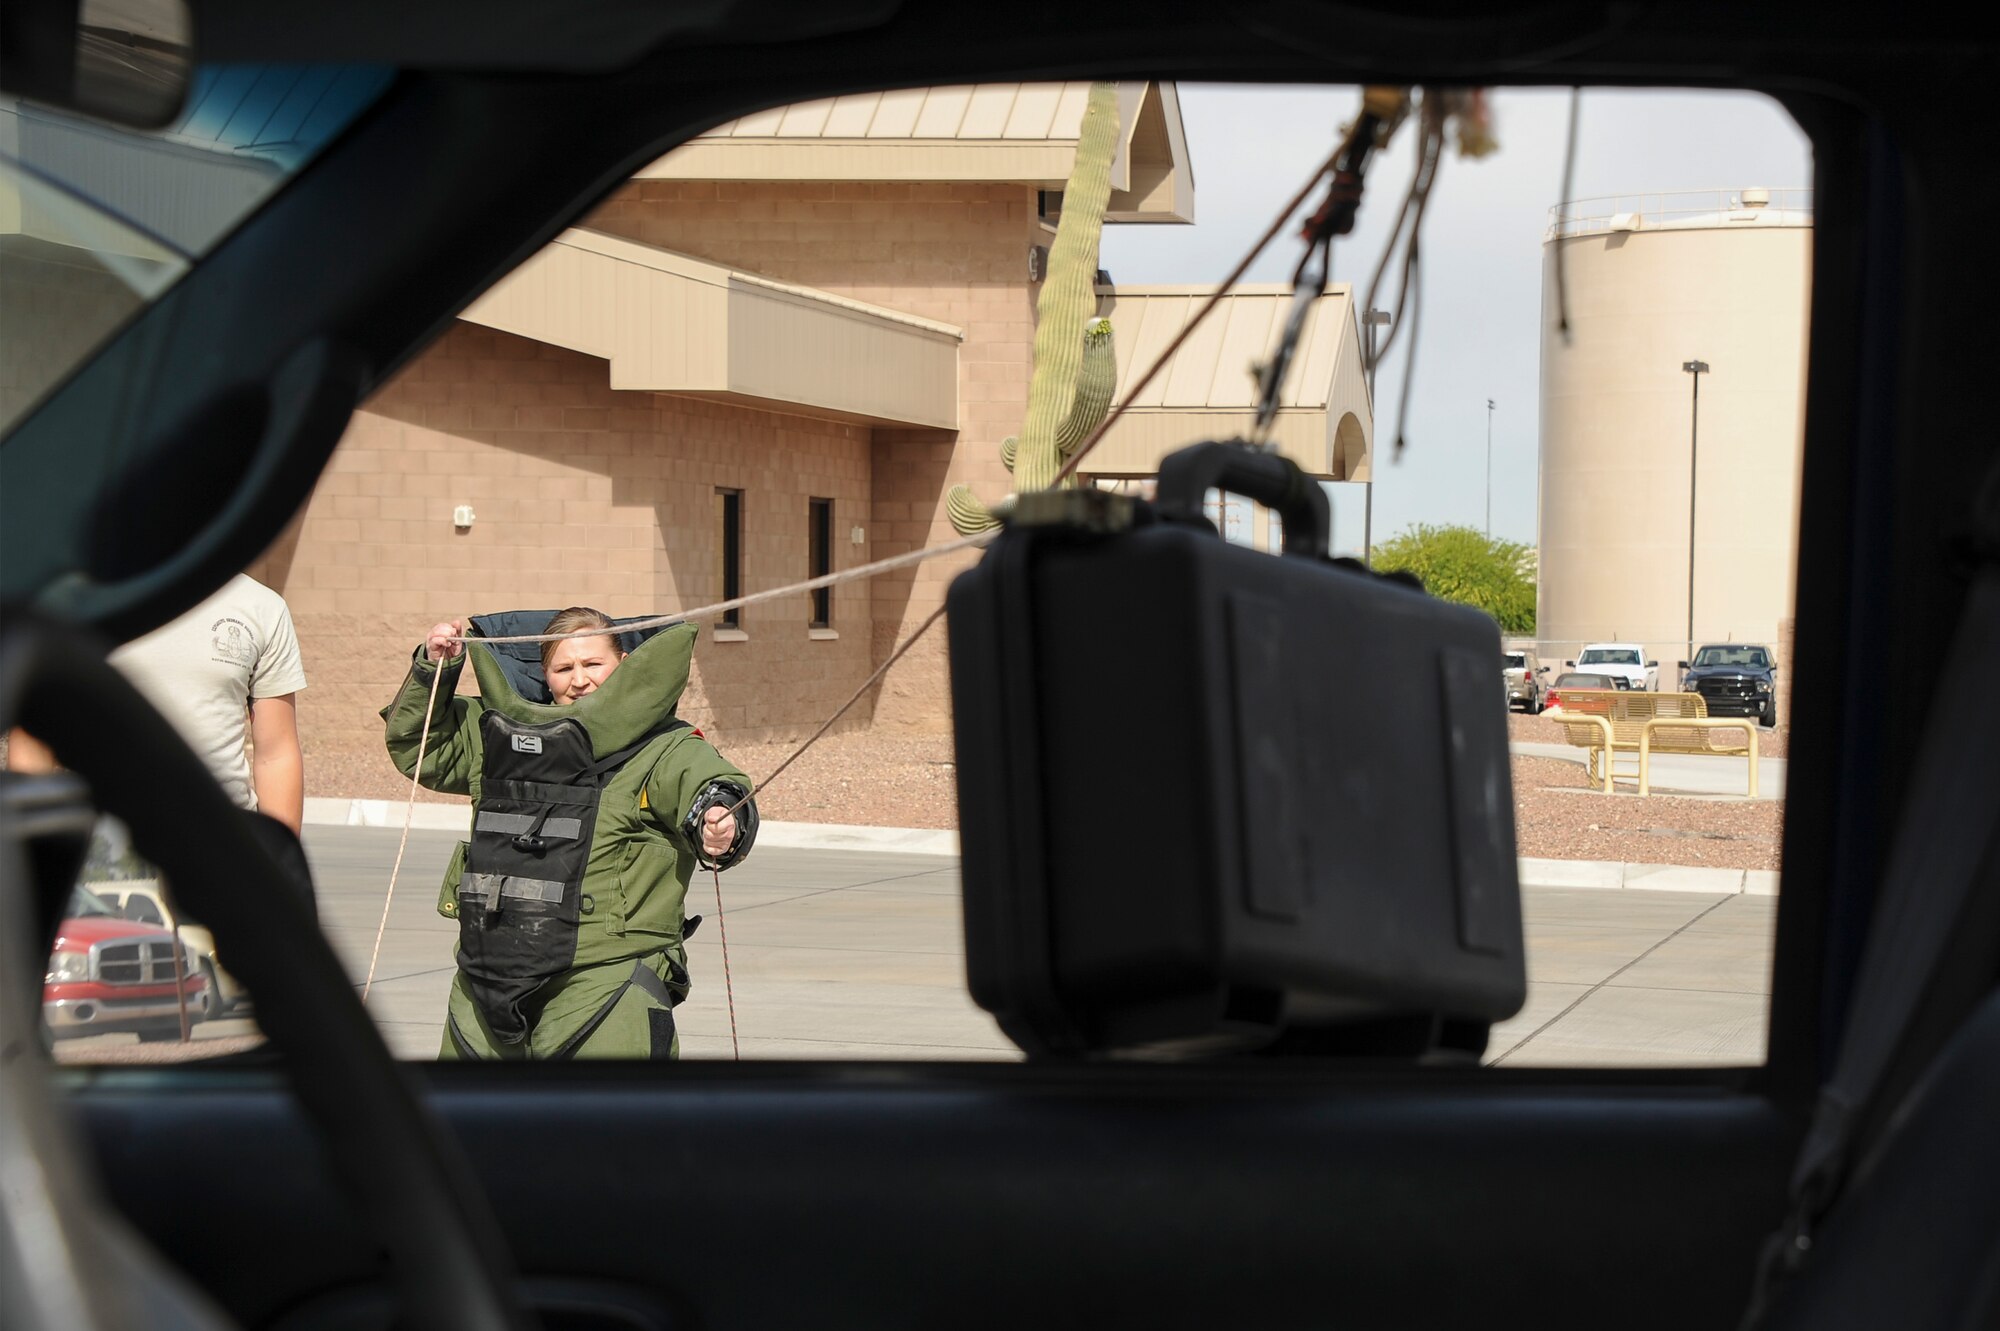 U.S. Air Force Master Sgt. Hass, 355th Civil Engineer Squadron first sergeant, uses a hook and line procedure to remotely remove a suspicious package from a vehicle during the Comprehensive Airman Fitness Month Fire Department Fitness Challenge at Davis-Monthan Air Force Base, Ariz., March 31, 2016.  The event was hosted by the 355th Civil Engineer Squadron’s explosive ordnance disposal and fire emergency service flights in coordination with the Community Support Center with the objectives of embracing team building, showing the links between different CAF pillars, and encouraging Airmen to challenge themselves. (U.S. Air Force photo by Airman 1st Class Mya M. Crosby/Released) (U.S. Air Force photo by Airman 1st Class Mya M. Crosby/Released)